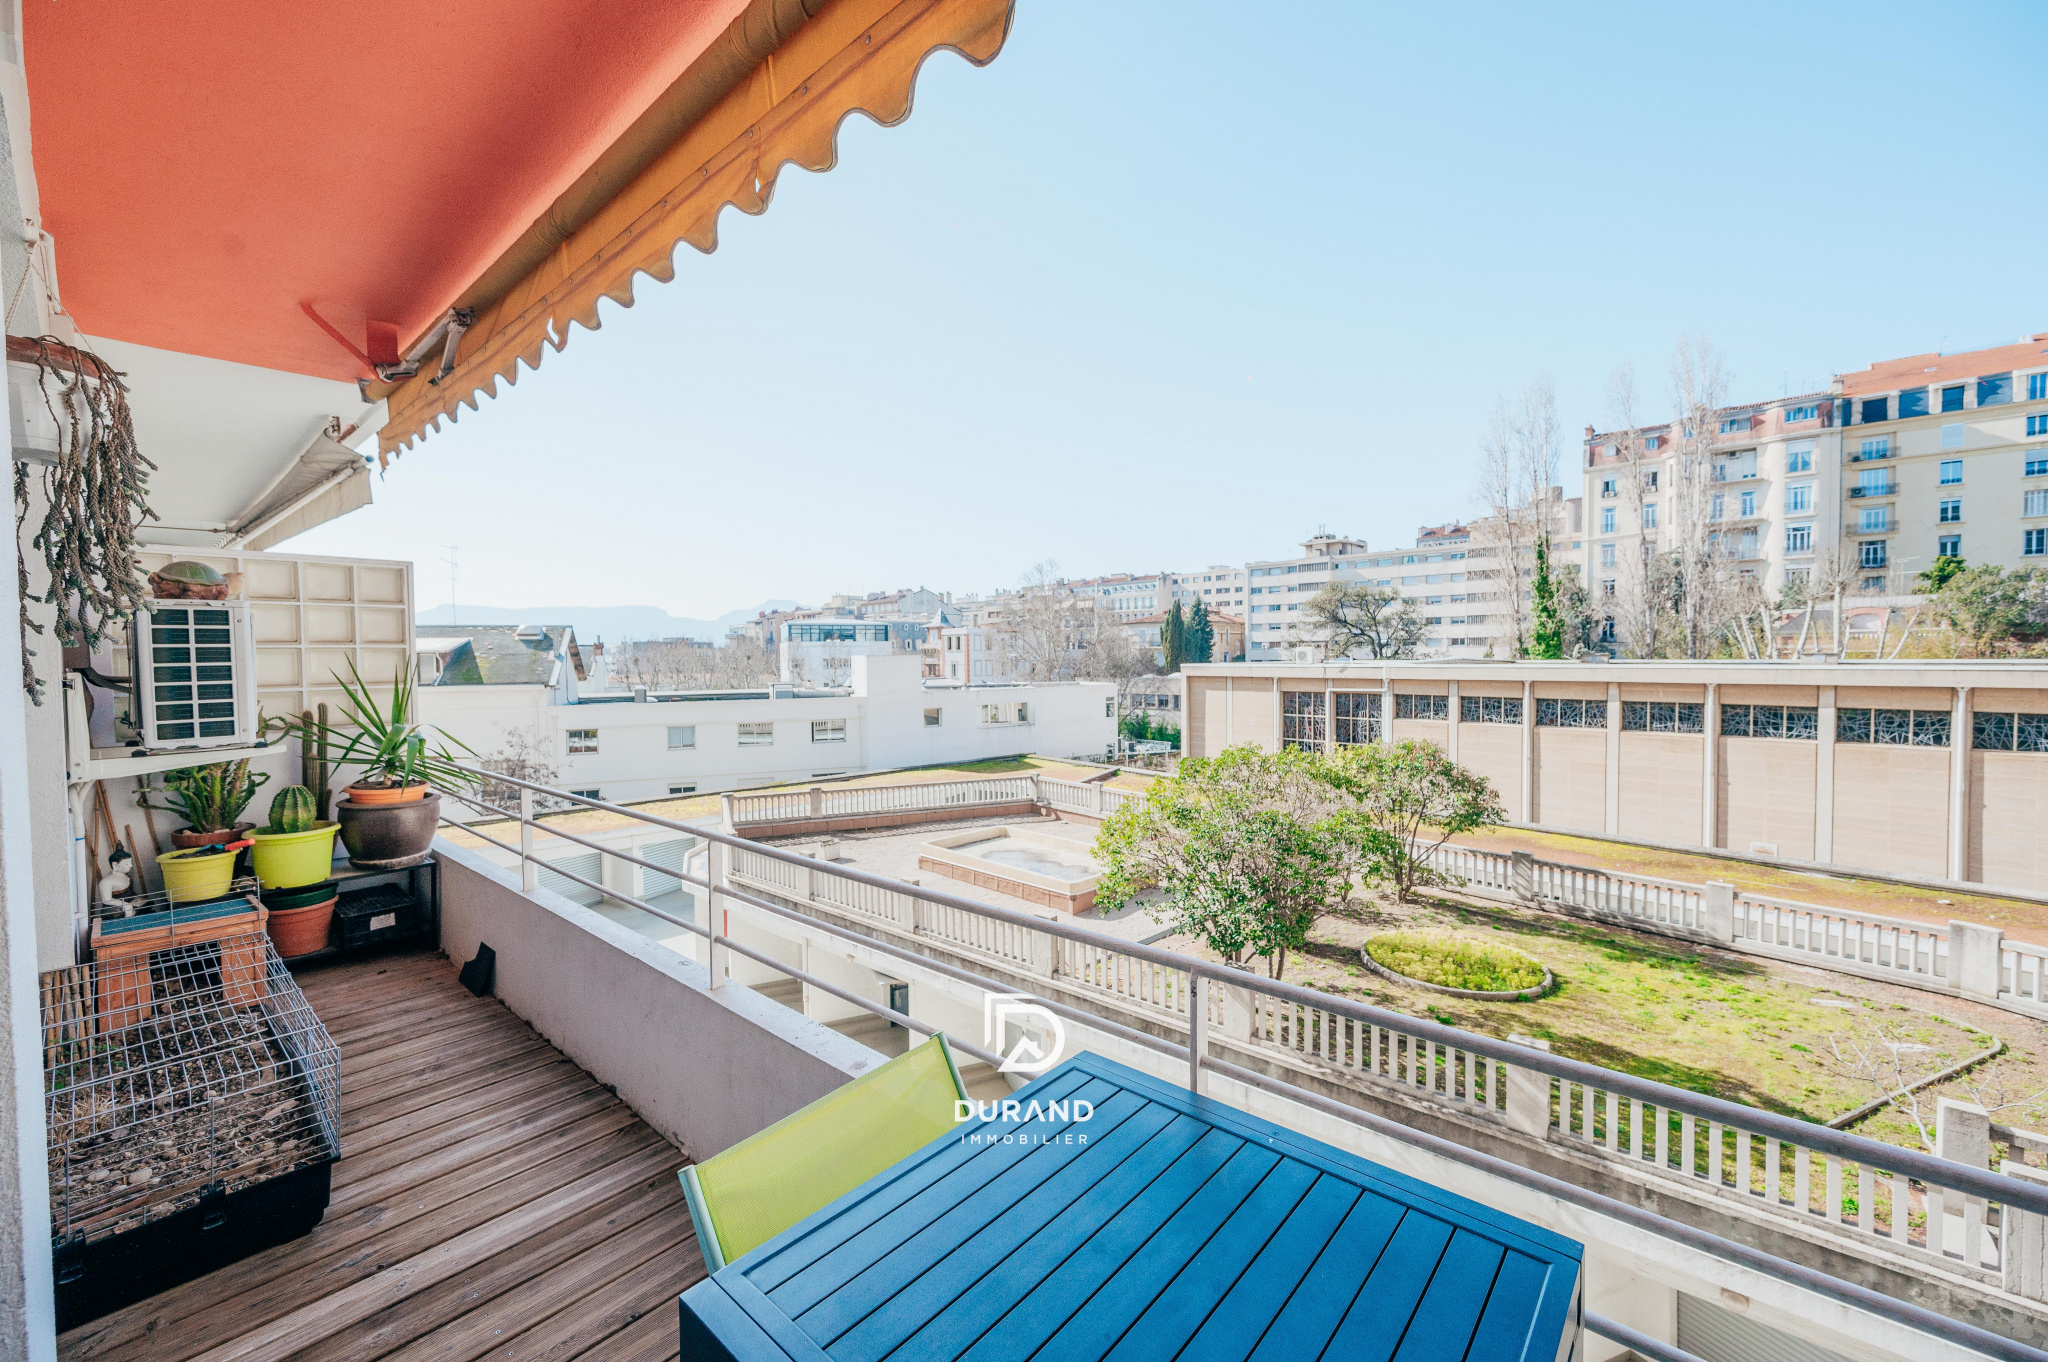 APPARTEMENT - TERRASSE - CARRE D'OR 13008 MARSEILLE